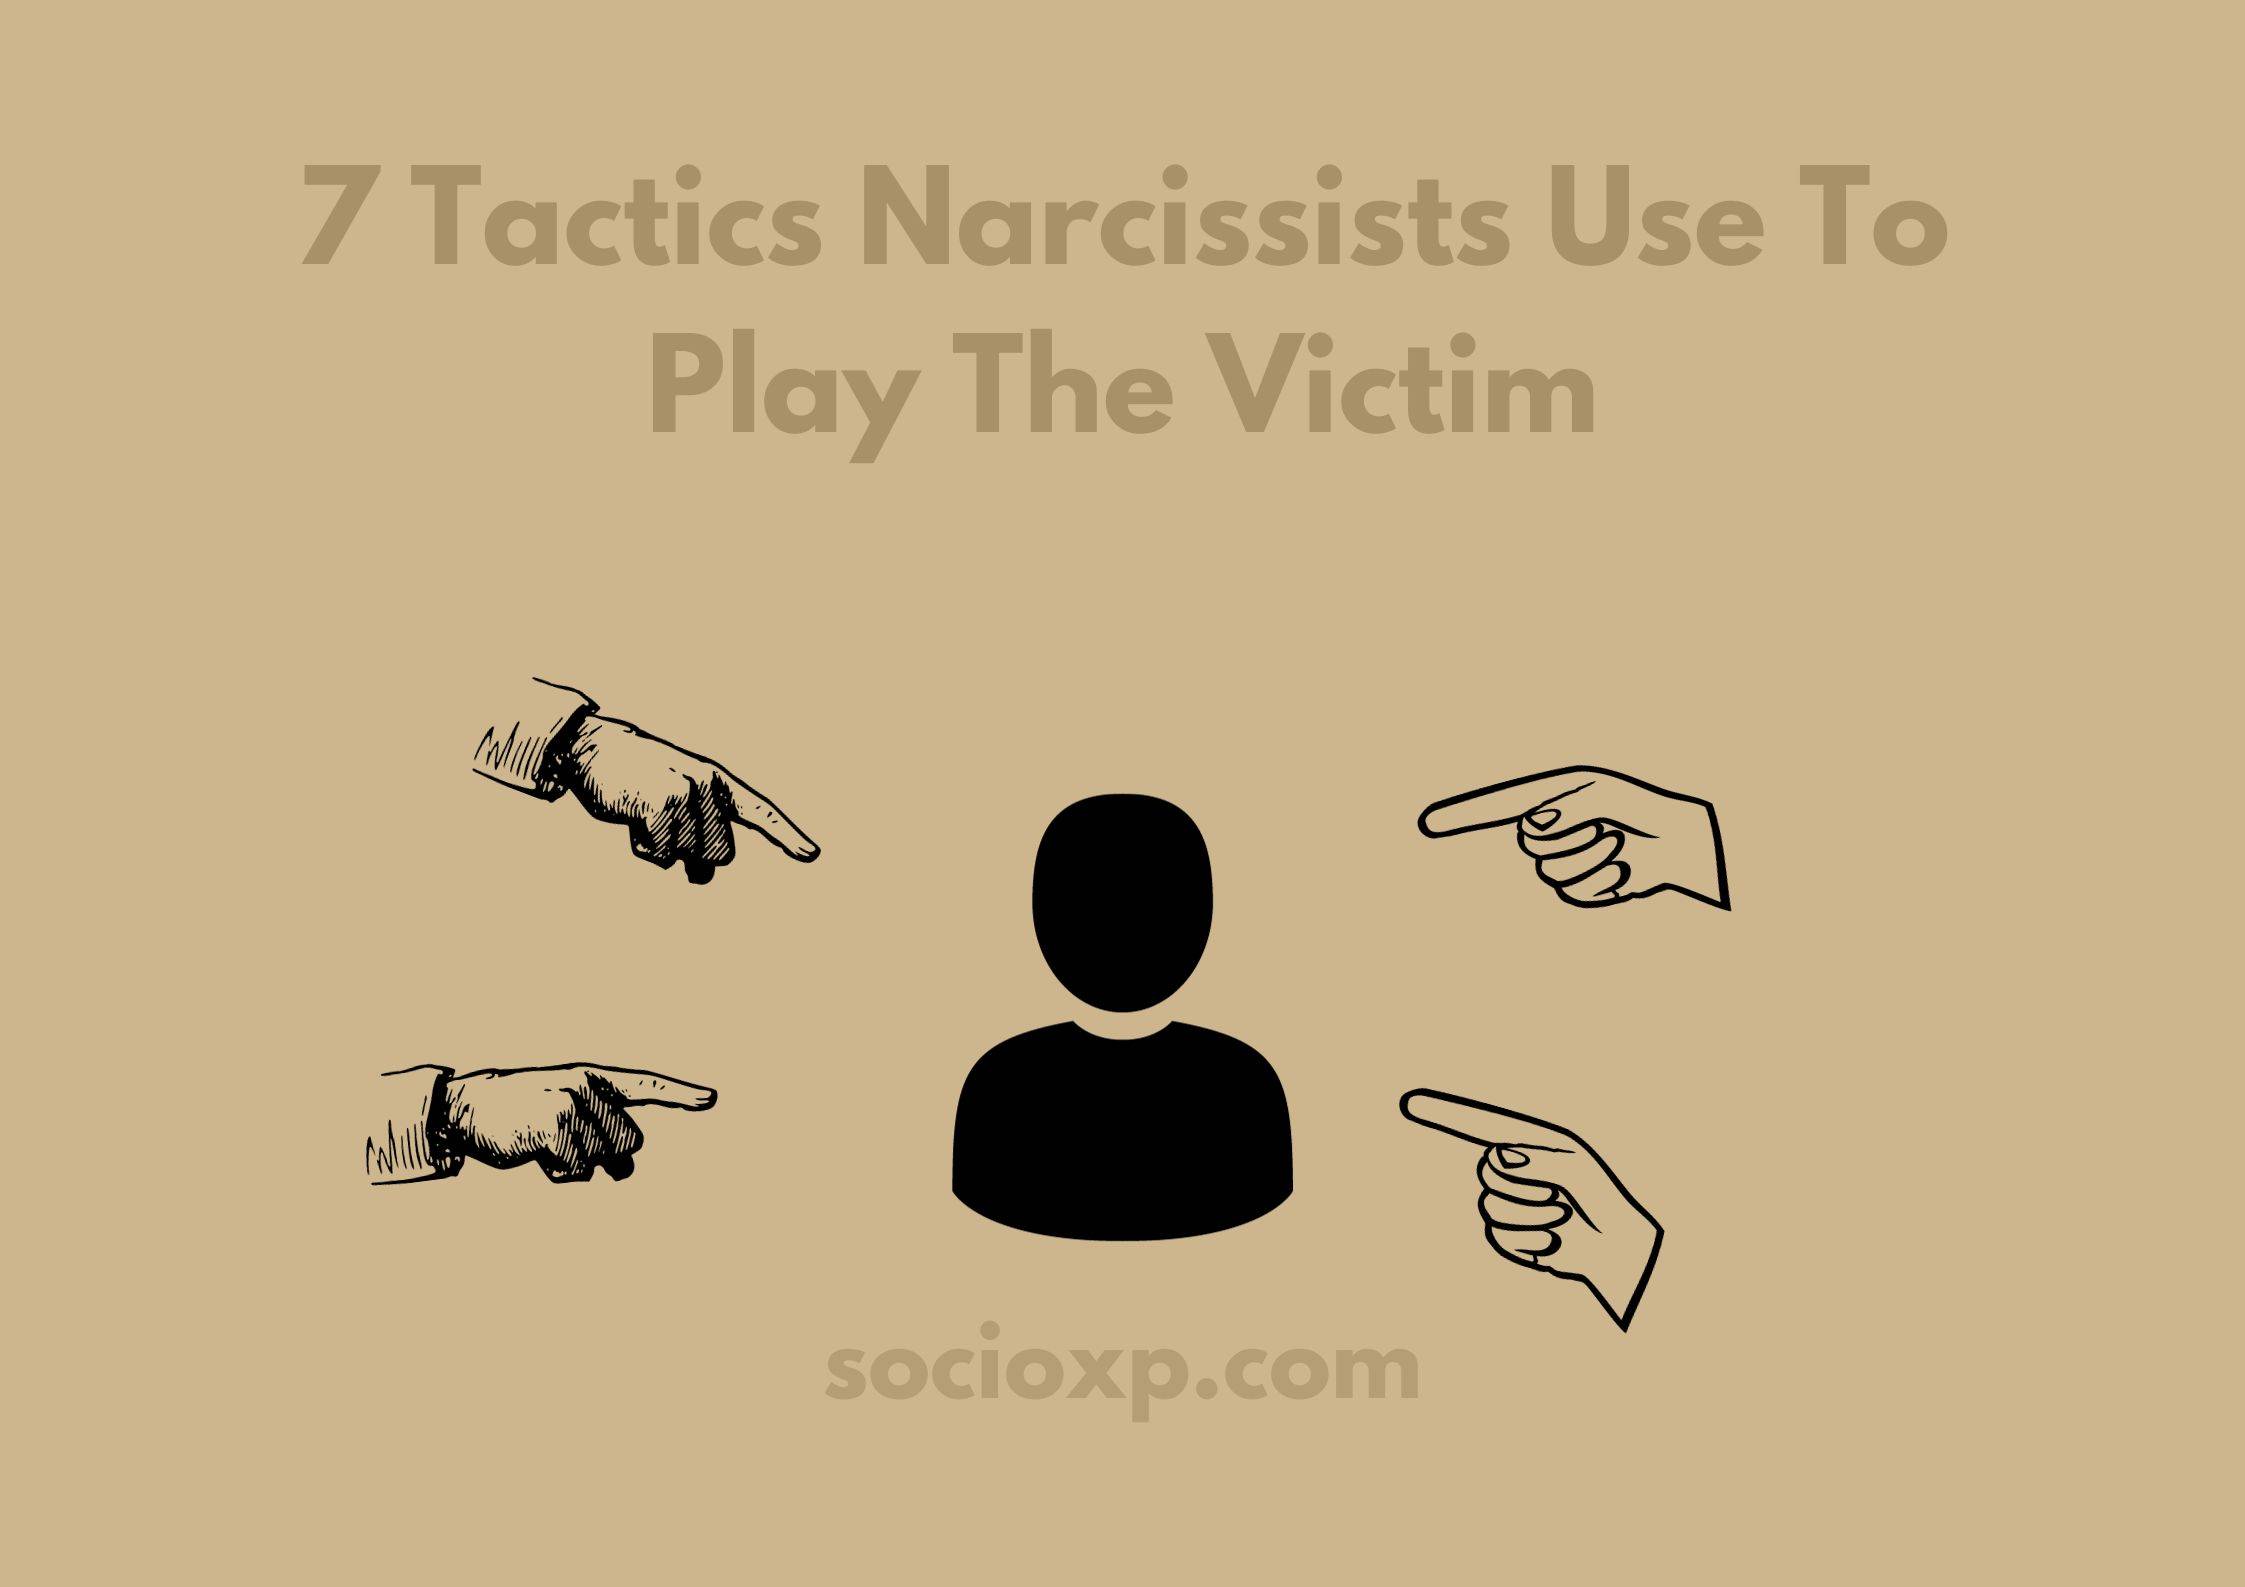 7 Tactics Narcissists Use To Play The Victim